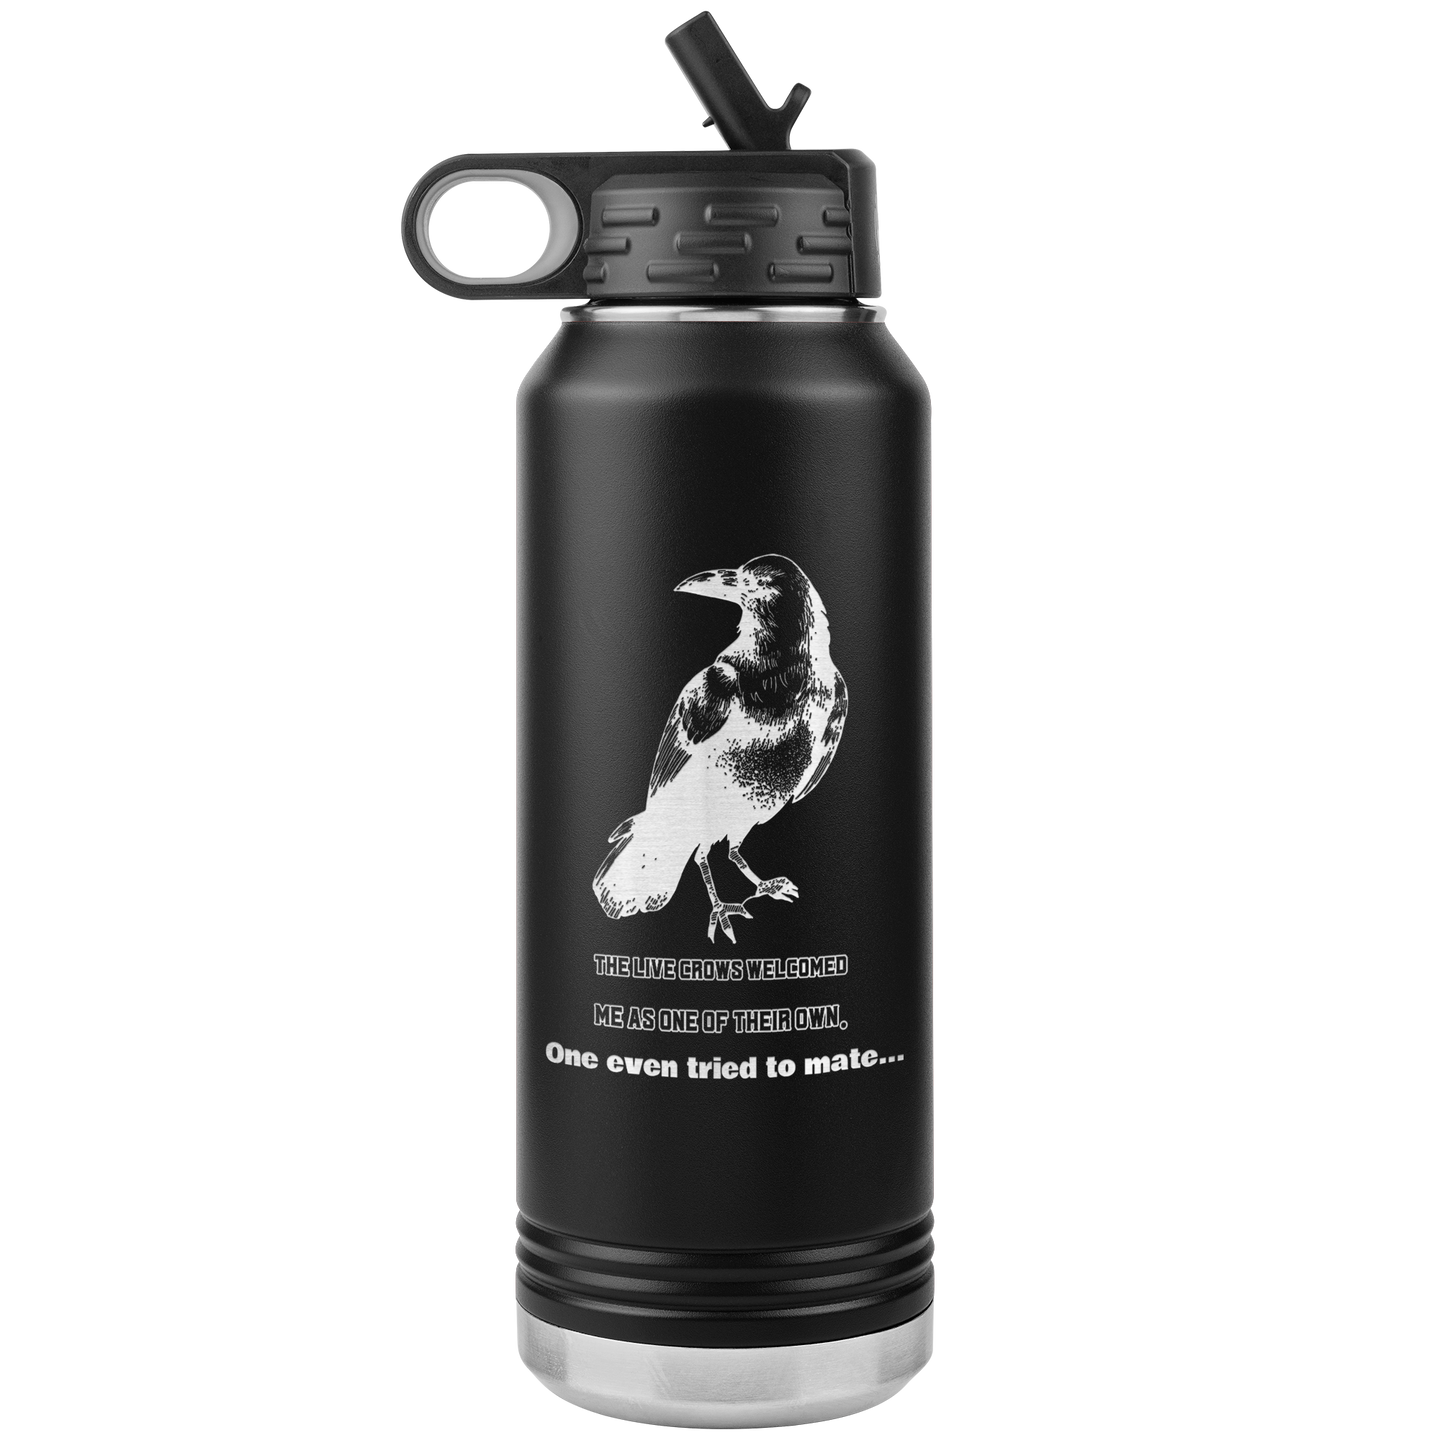 Crows Welcome Moira - Water Bottle, Stainless Steel, 32 oz Tumbler